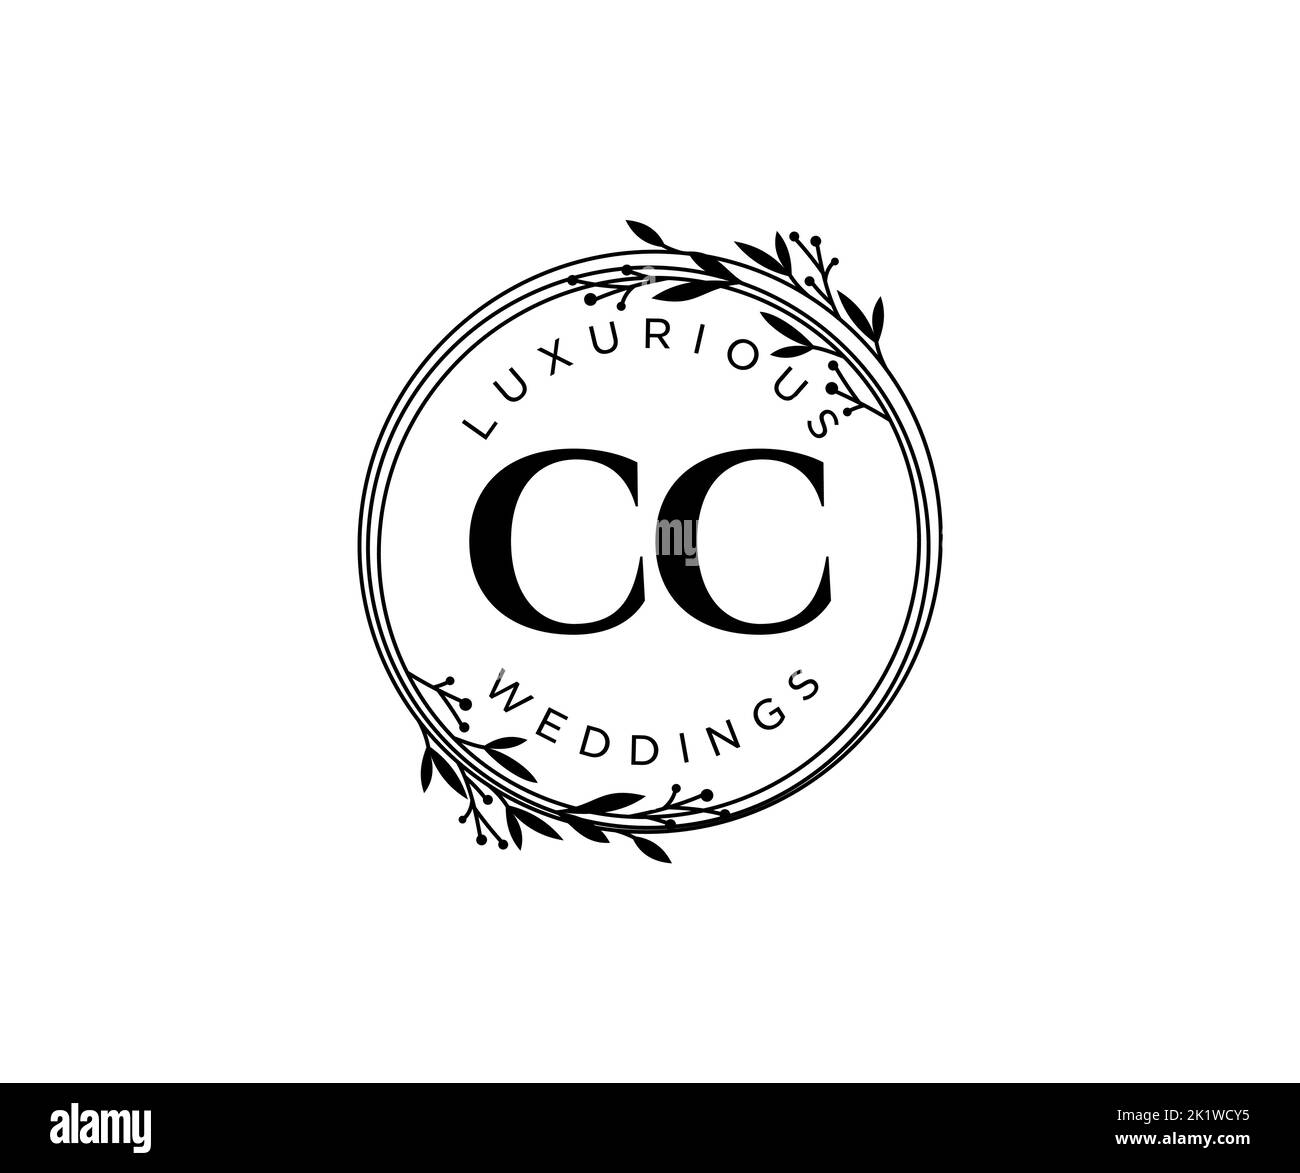 CC Initials letter Wedding monogram logos template, hand drawn modern minimalistic and floral templates for Invitation cards, Save the Date, elegant Stock Vector